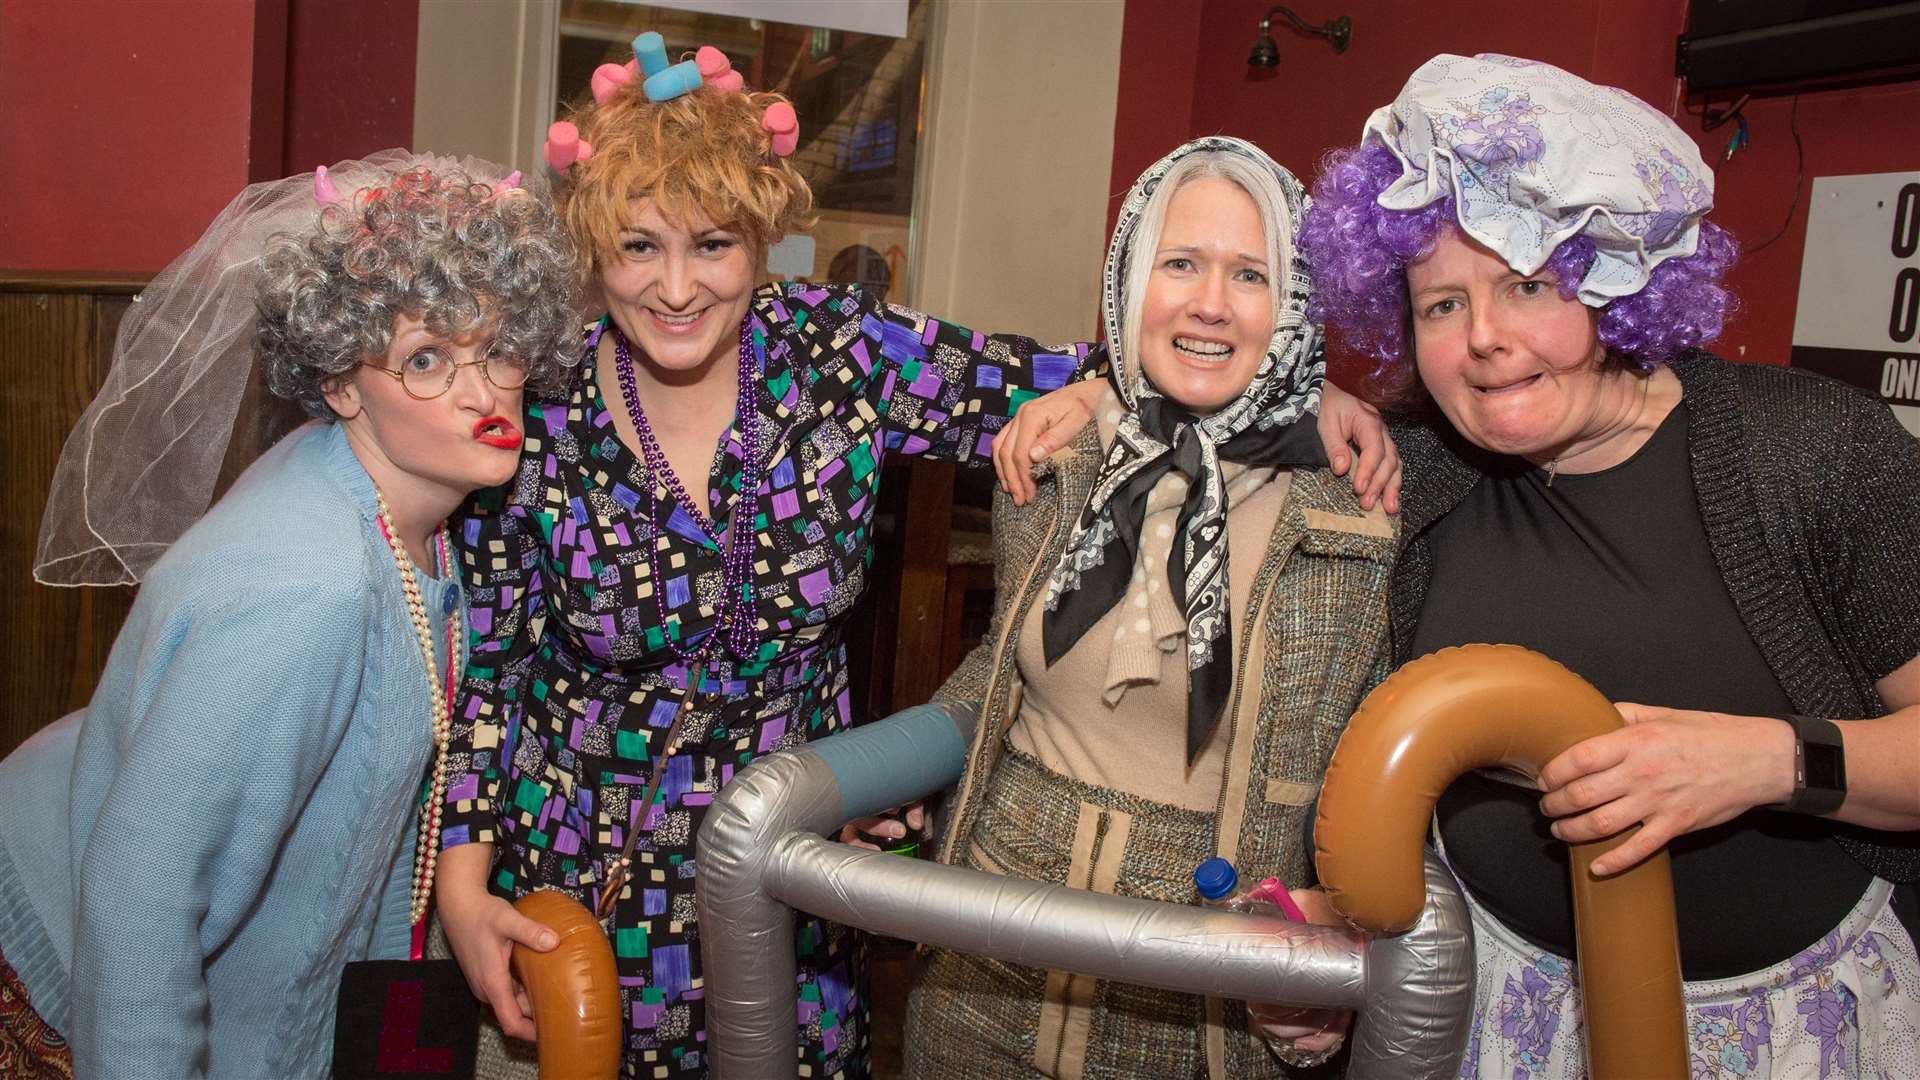 Alternative hen night for bride to be Katy Battison with hens (left to right) Ewa Wojt (correct), Suzy Robson and Liz Proudlock. Picture: Callum Mackay.